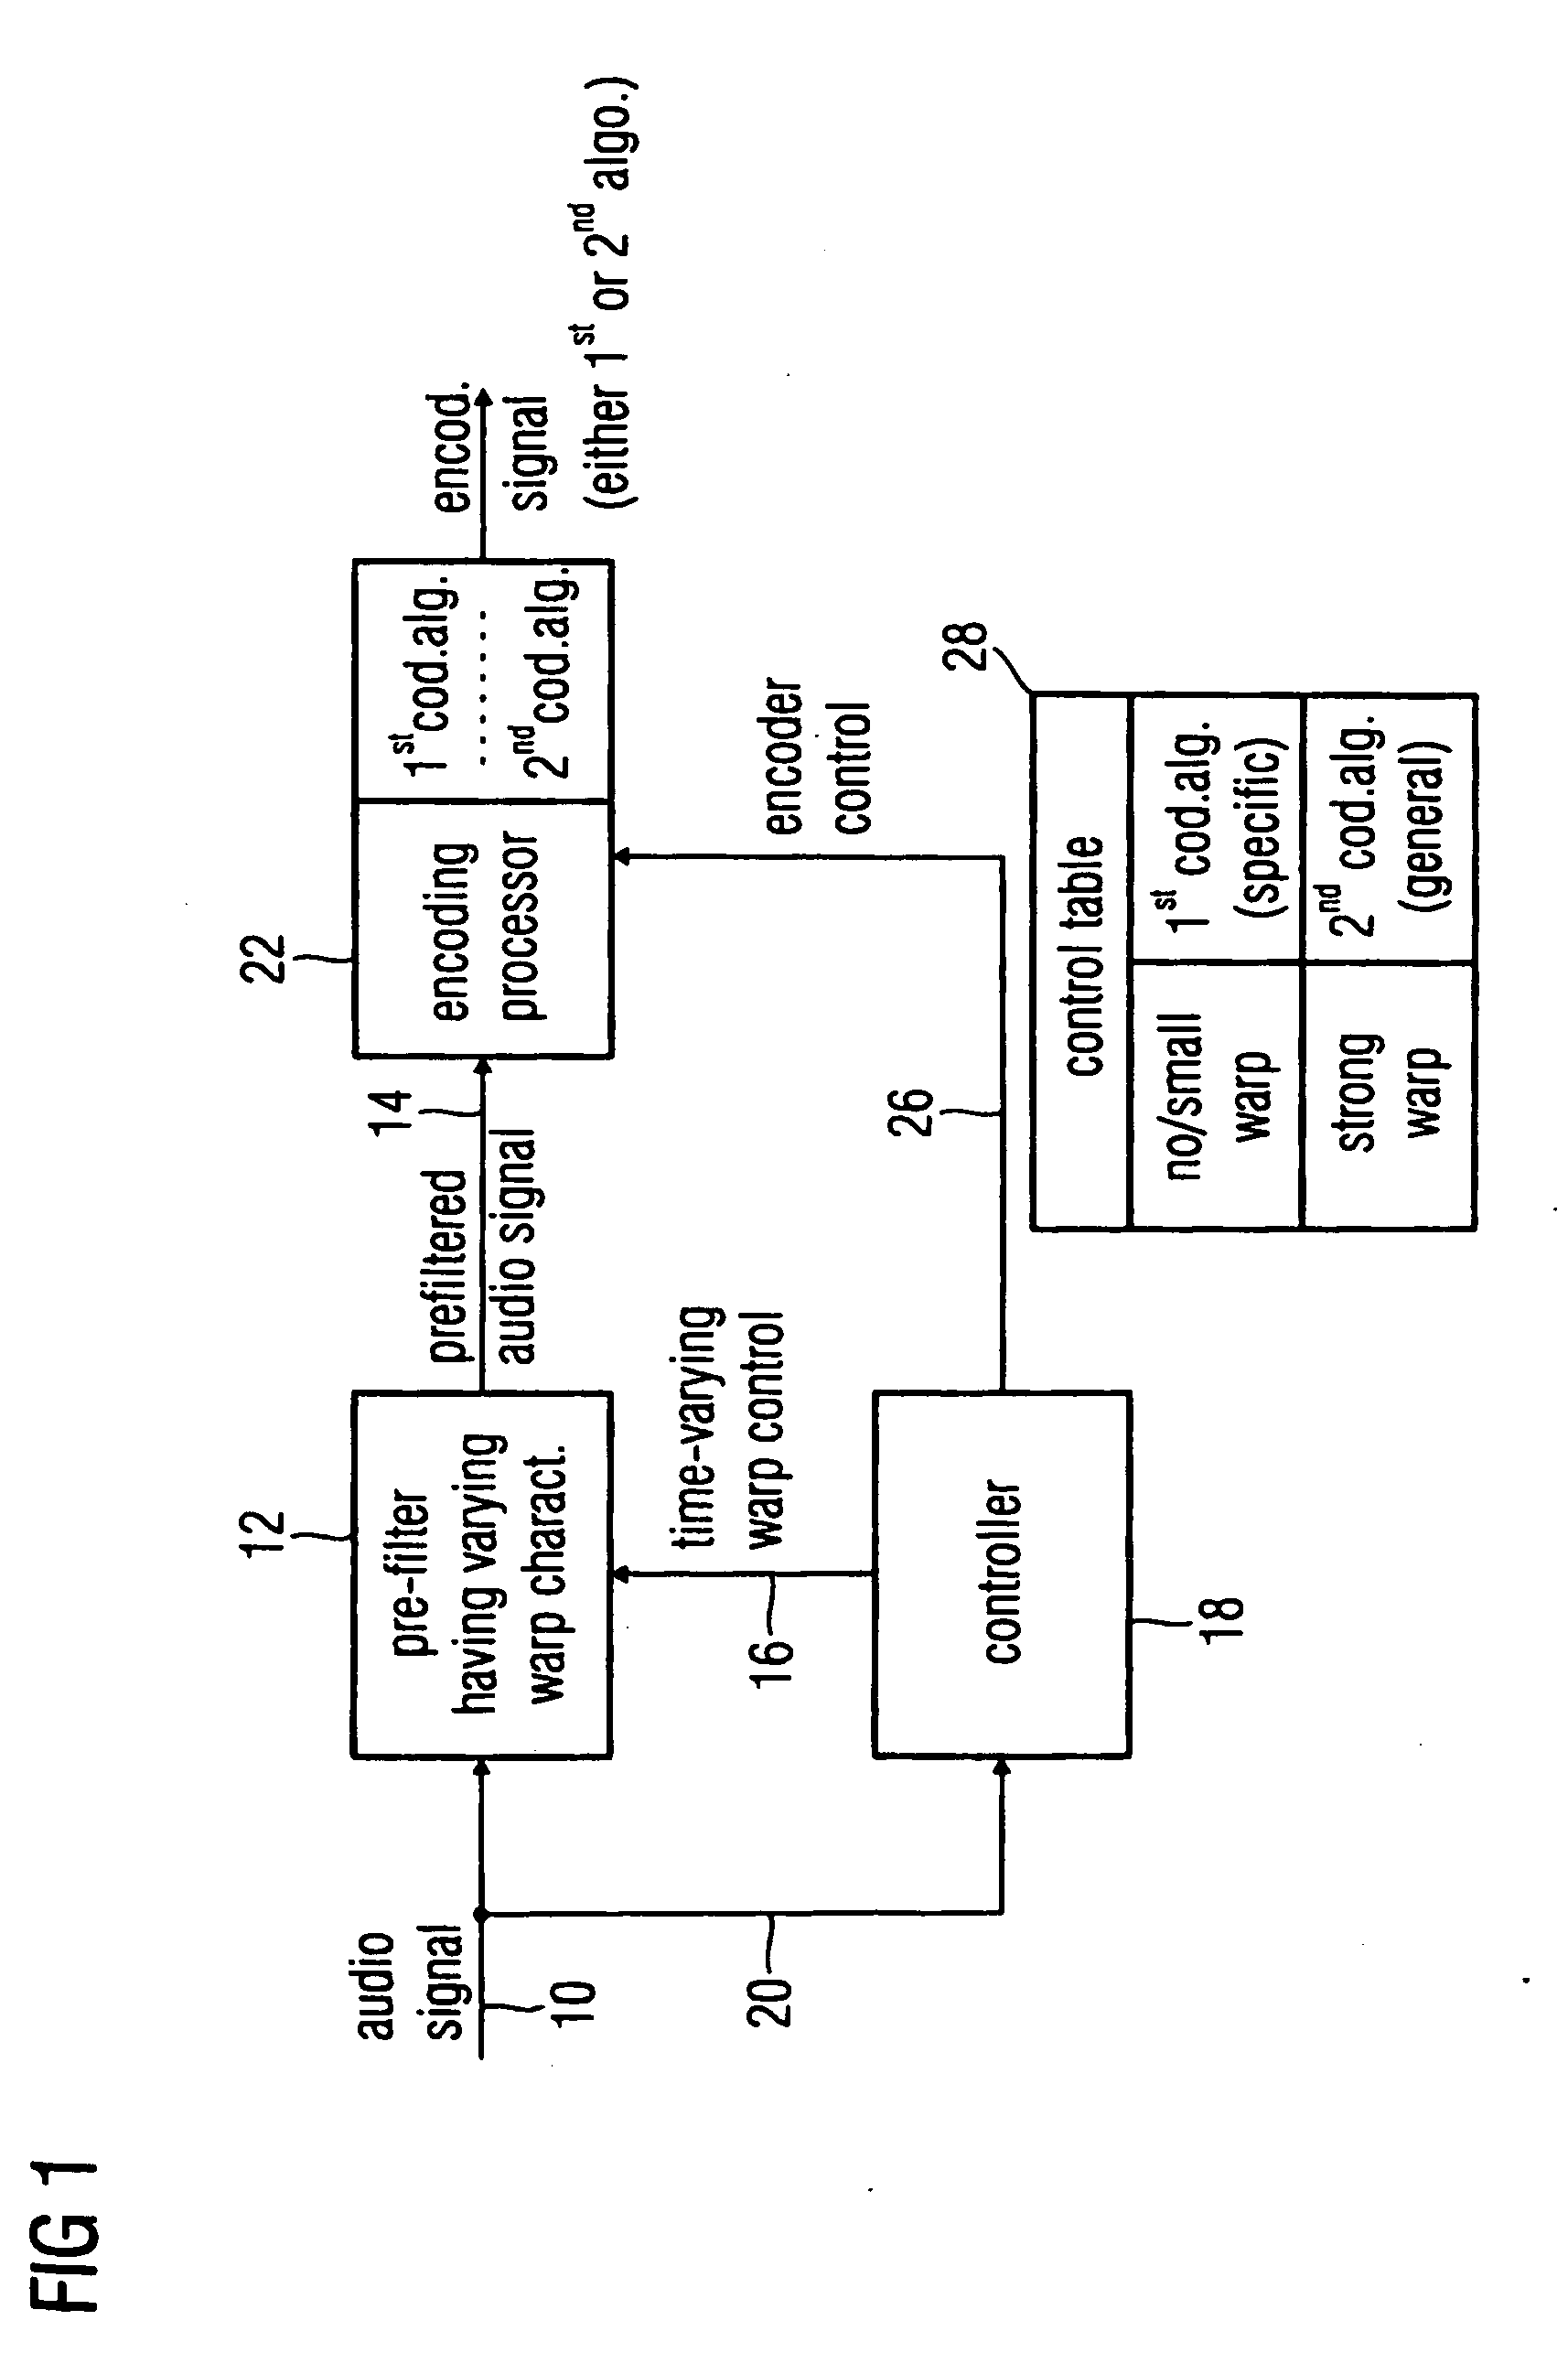 Audio encoder, audio decoder and audio processor having a dynamically variable warping characteristic